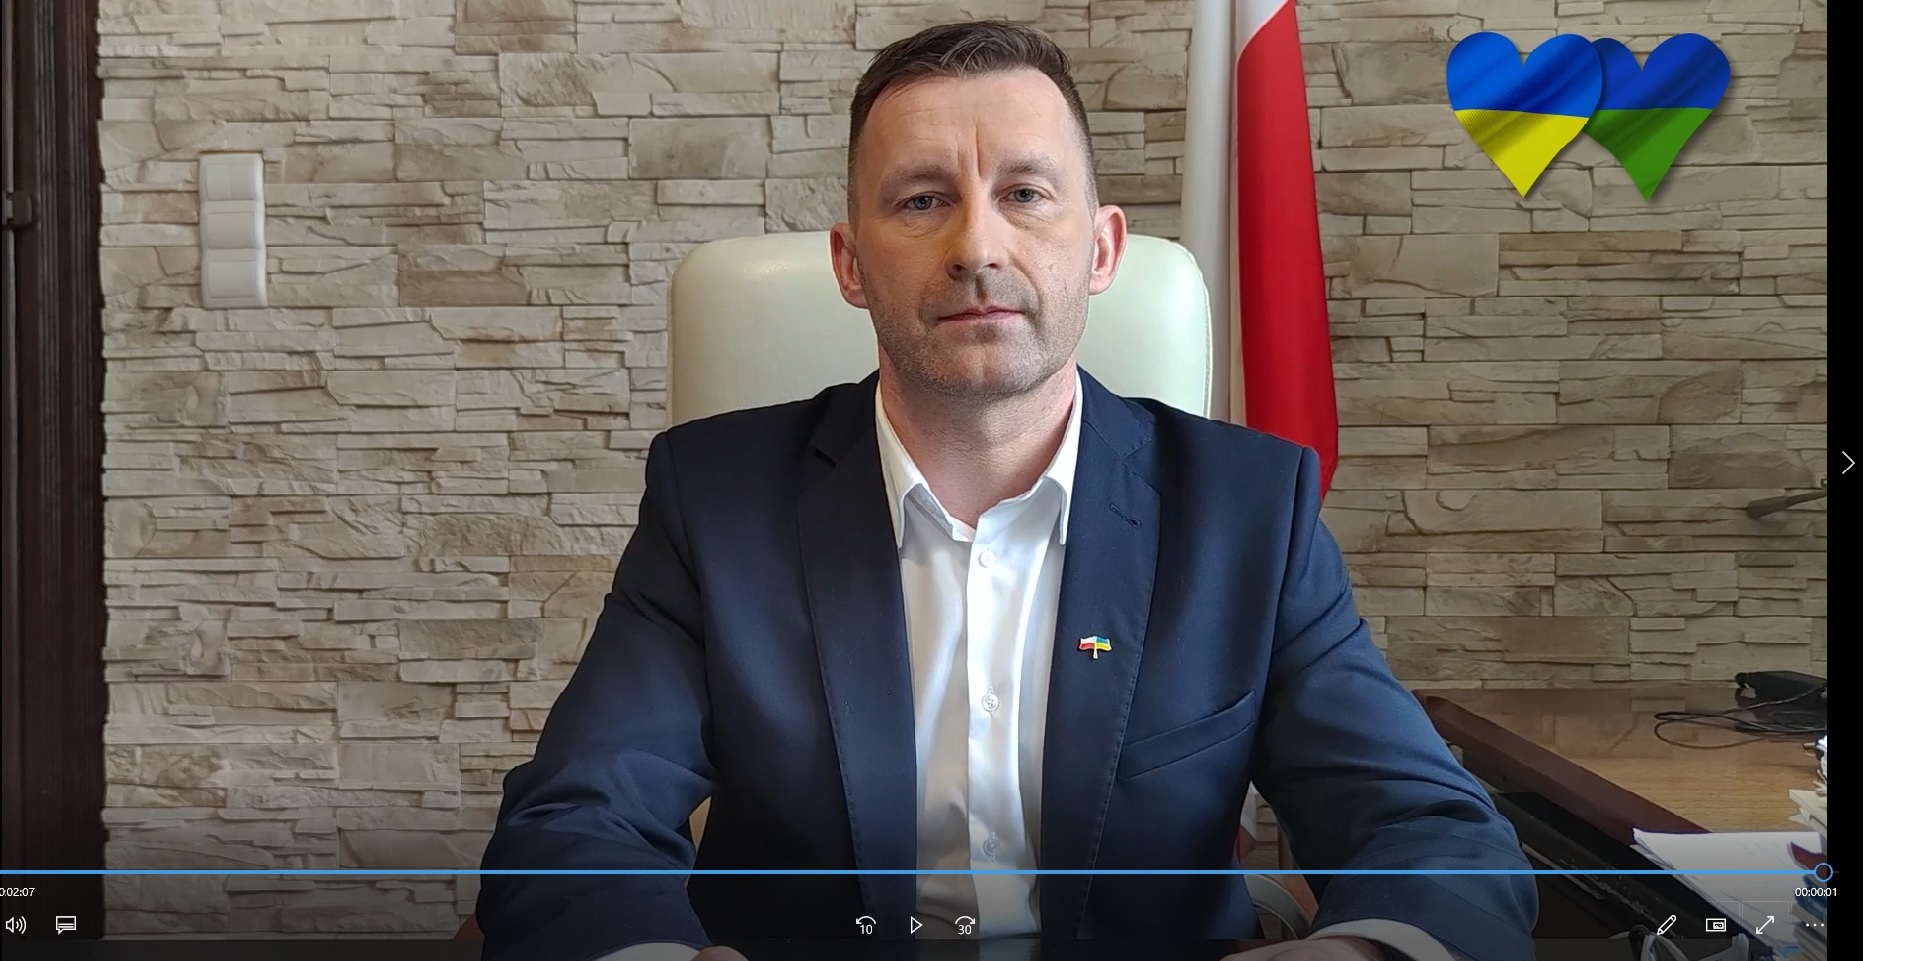 The President of Elk invites Ukrainian citizens to a concert in the ECC – watch the video